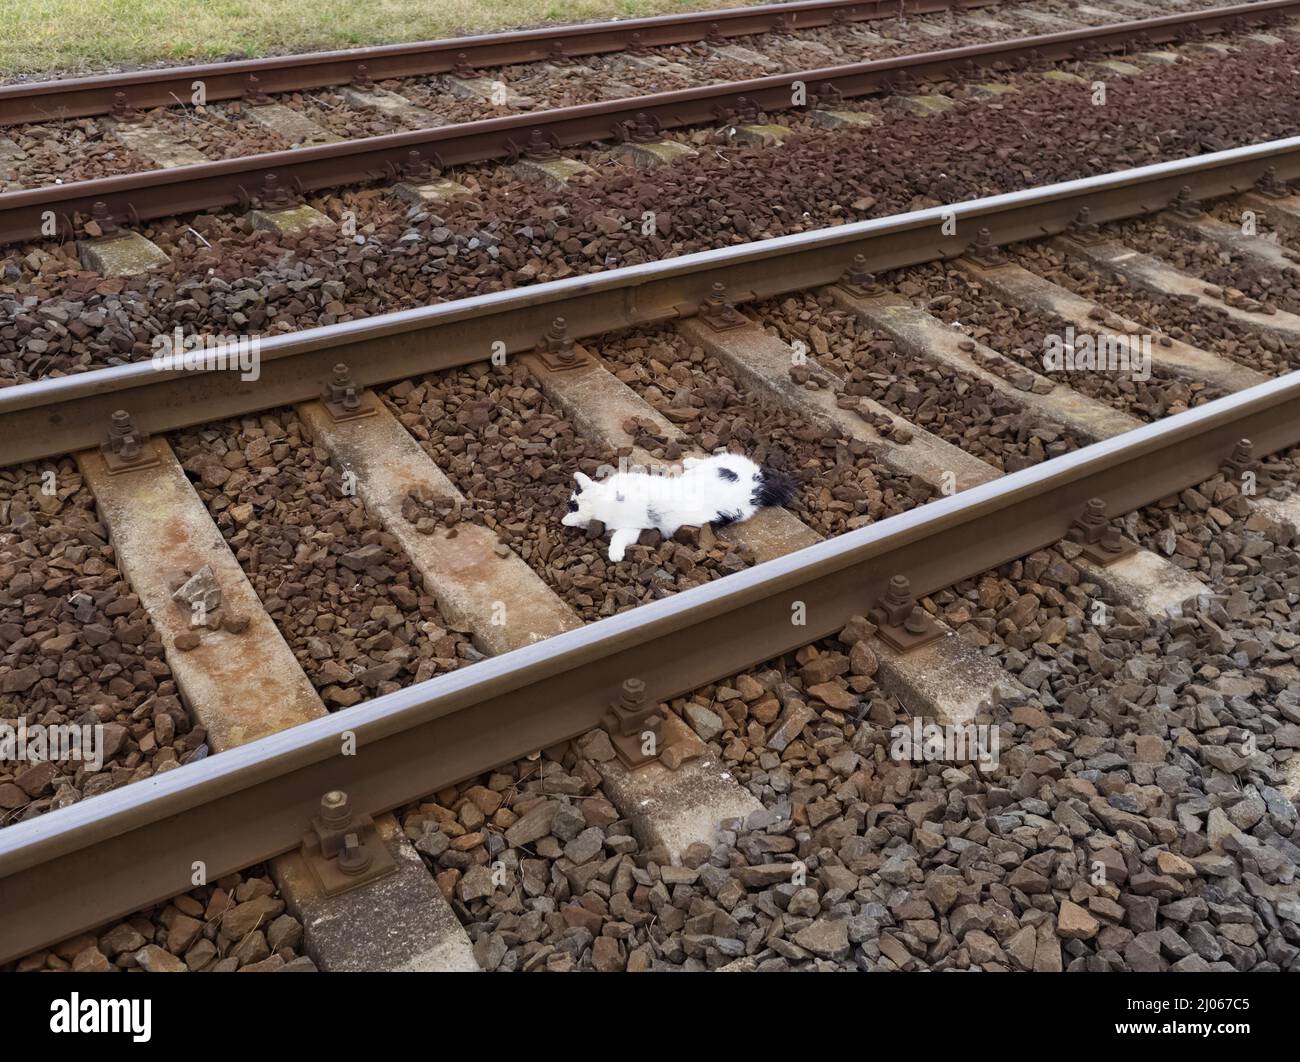 White Dead Cat on Railway Tracks Hit by Train Stock Photo